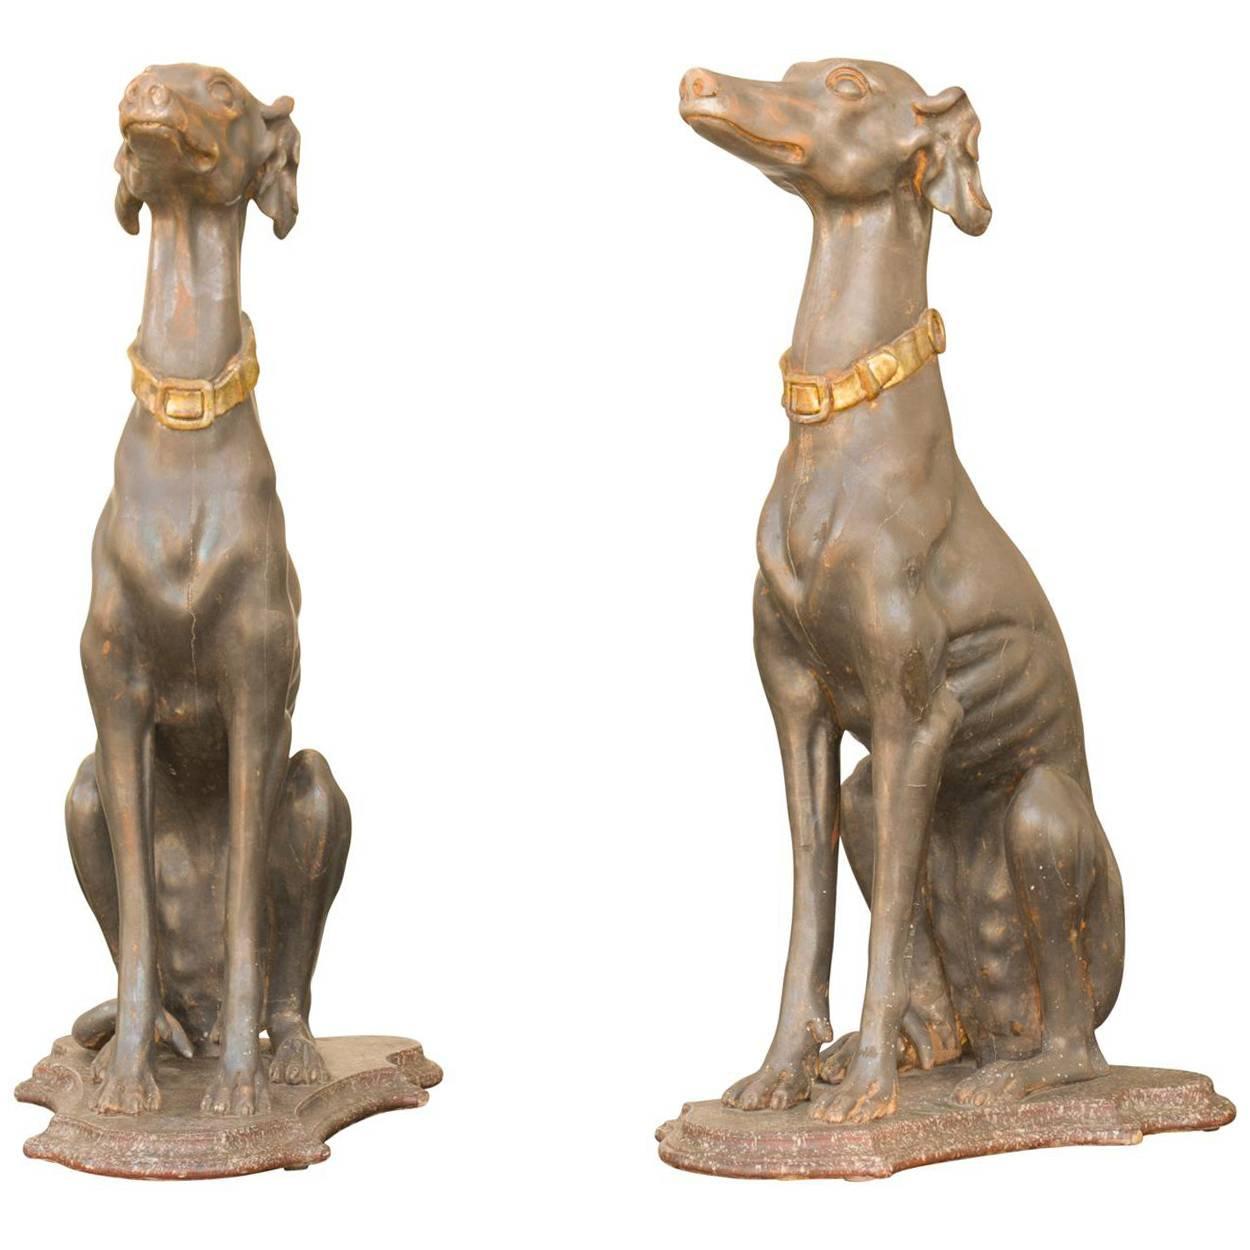 Pair of Italian Carved Wood Seated Greyhound Sculptures from the 19th Century